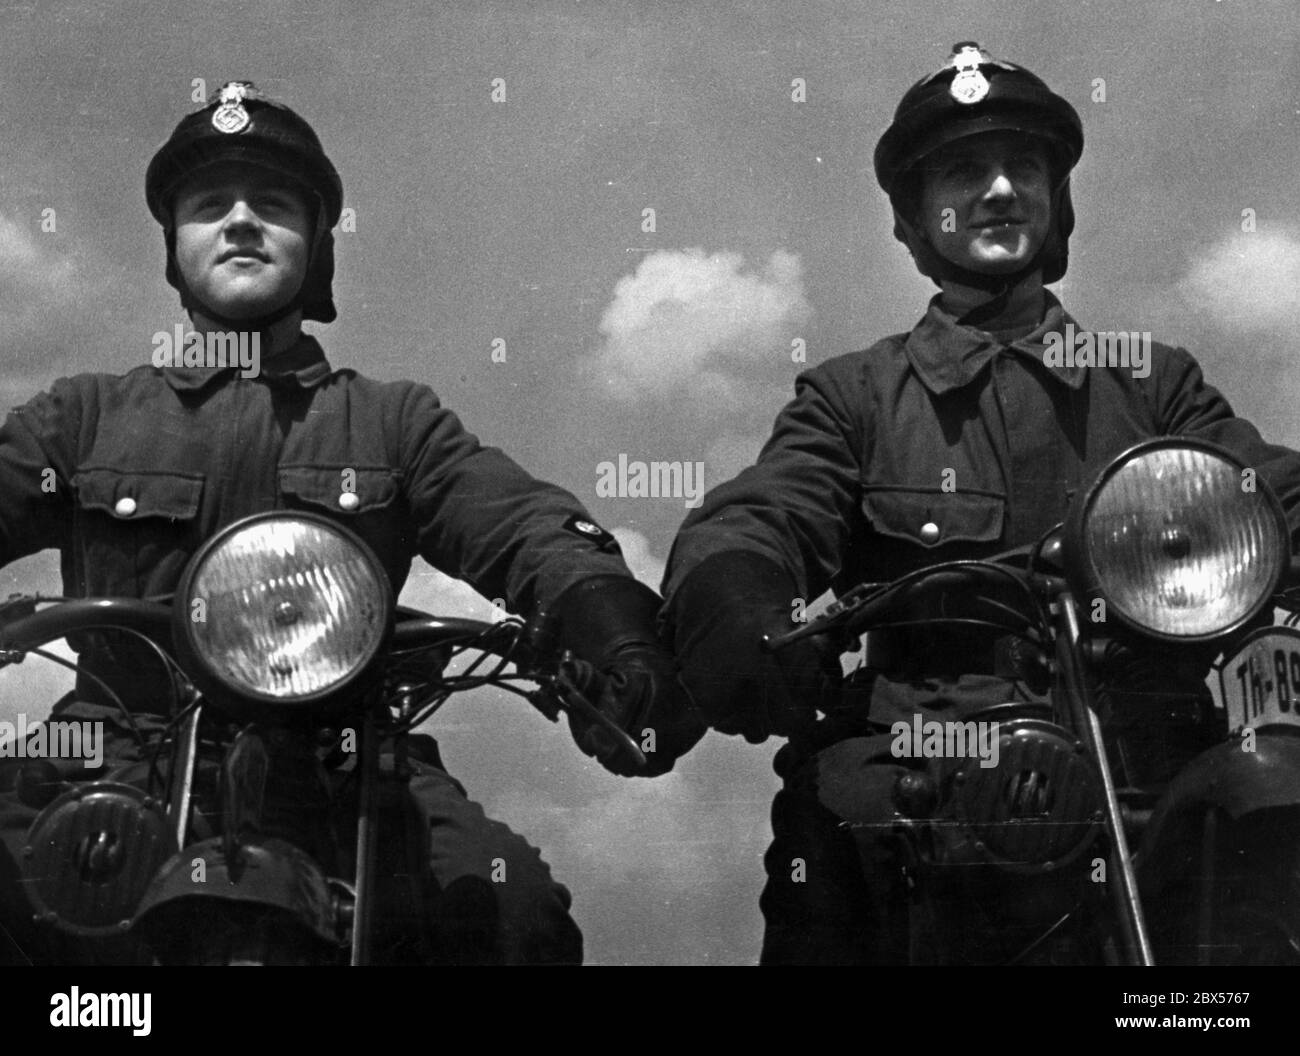 Two members of the Motor Hitler Youth sit on their motorcycles before the ride. They wear helmets. Stock Photo